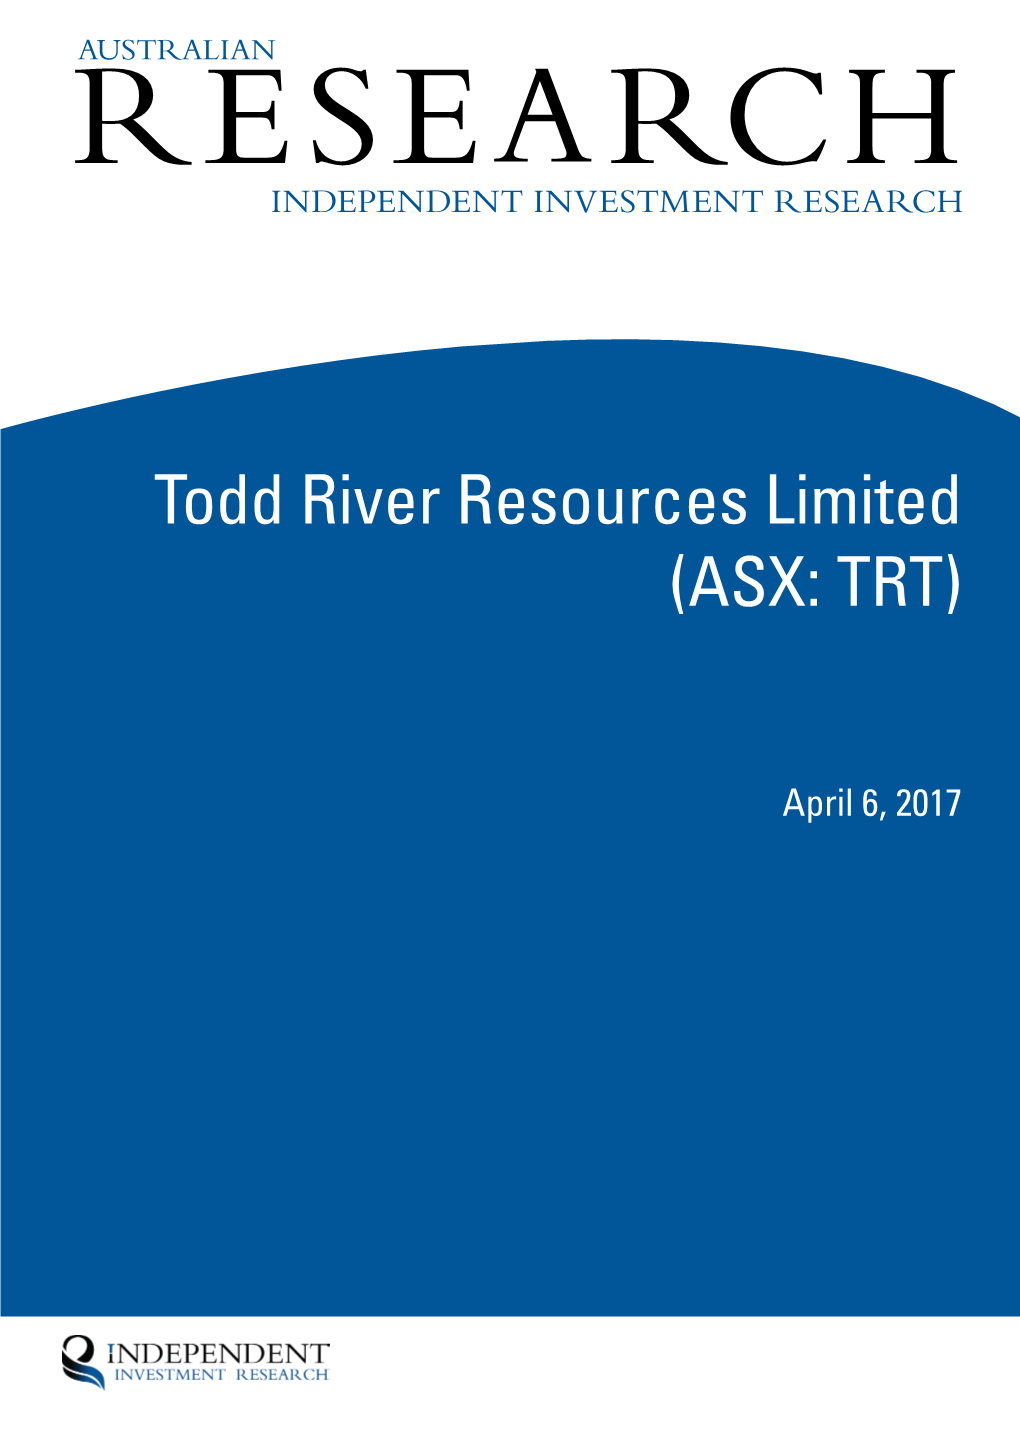 Todd River Resources Limited (ASX: TRT)